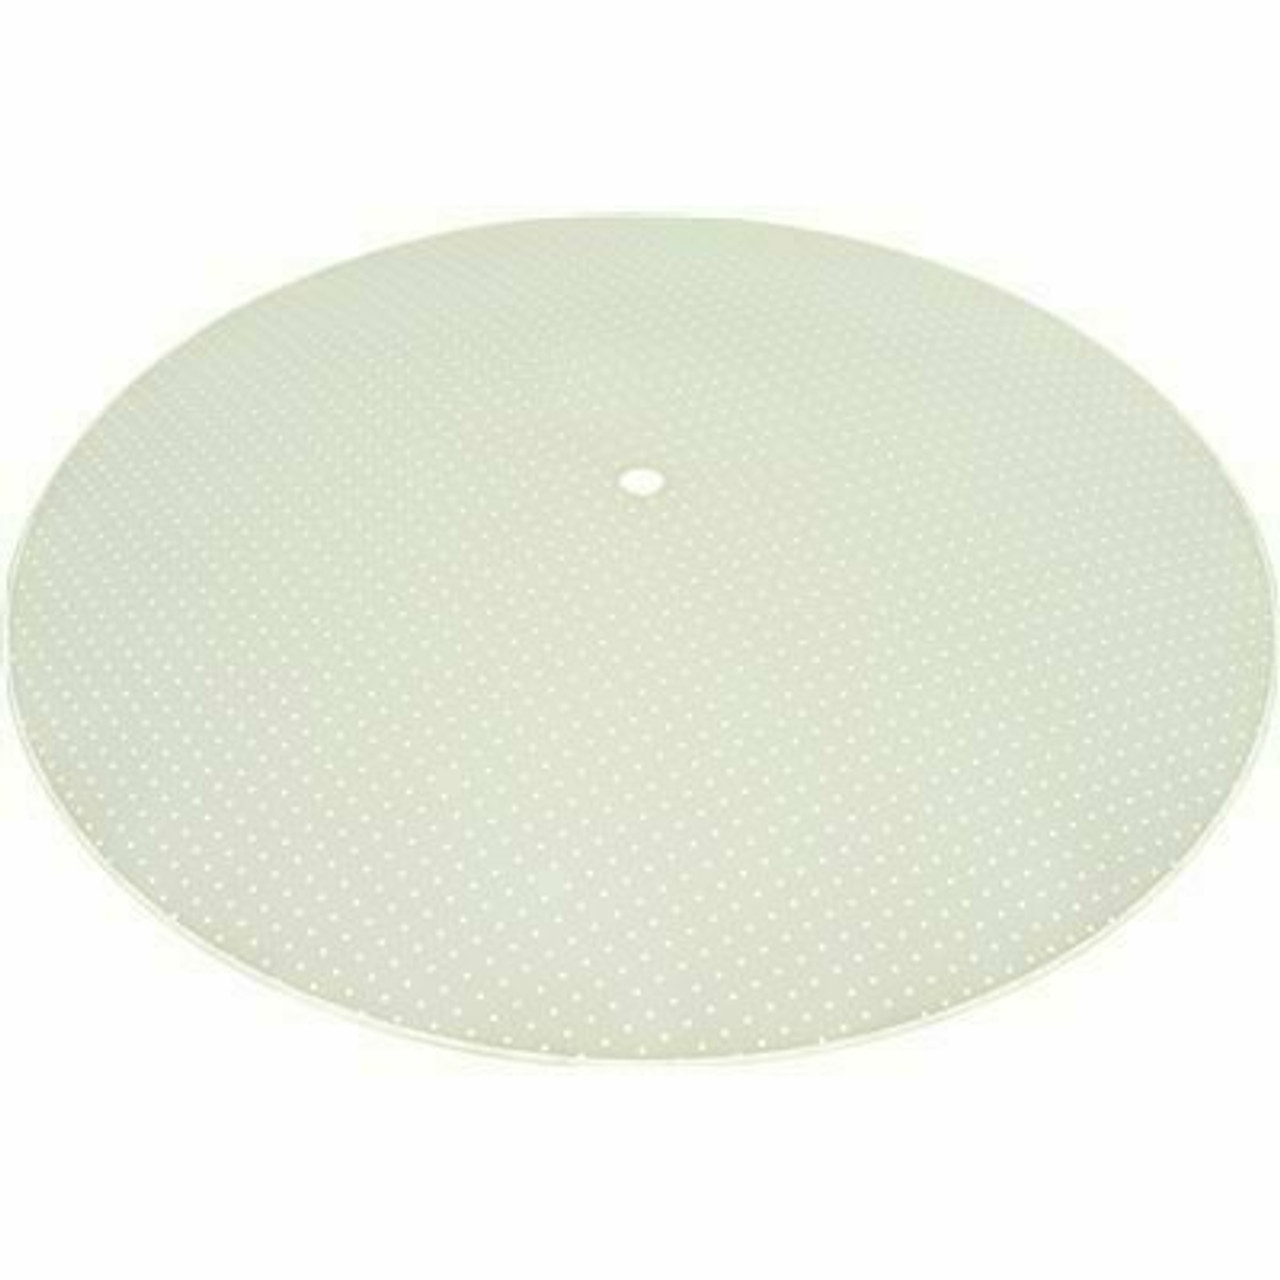 Westinghouse Lighting Westinghouse Round Ceiling Fixture Replacement Glass, Clear Dot Pattern, 13 In.